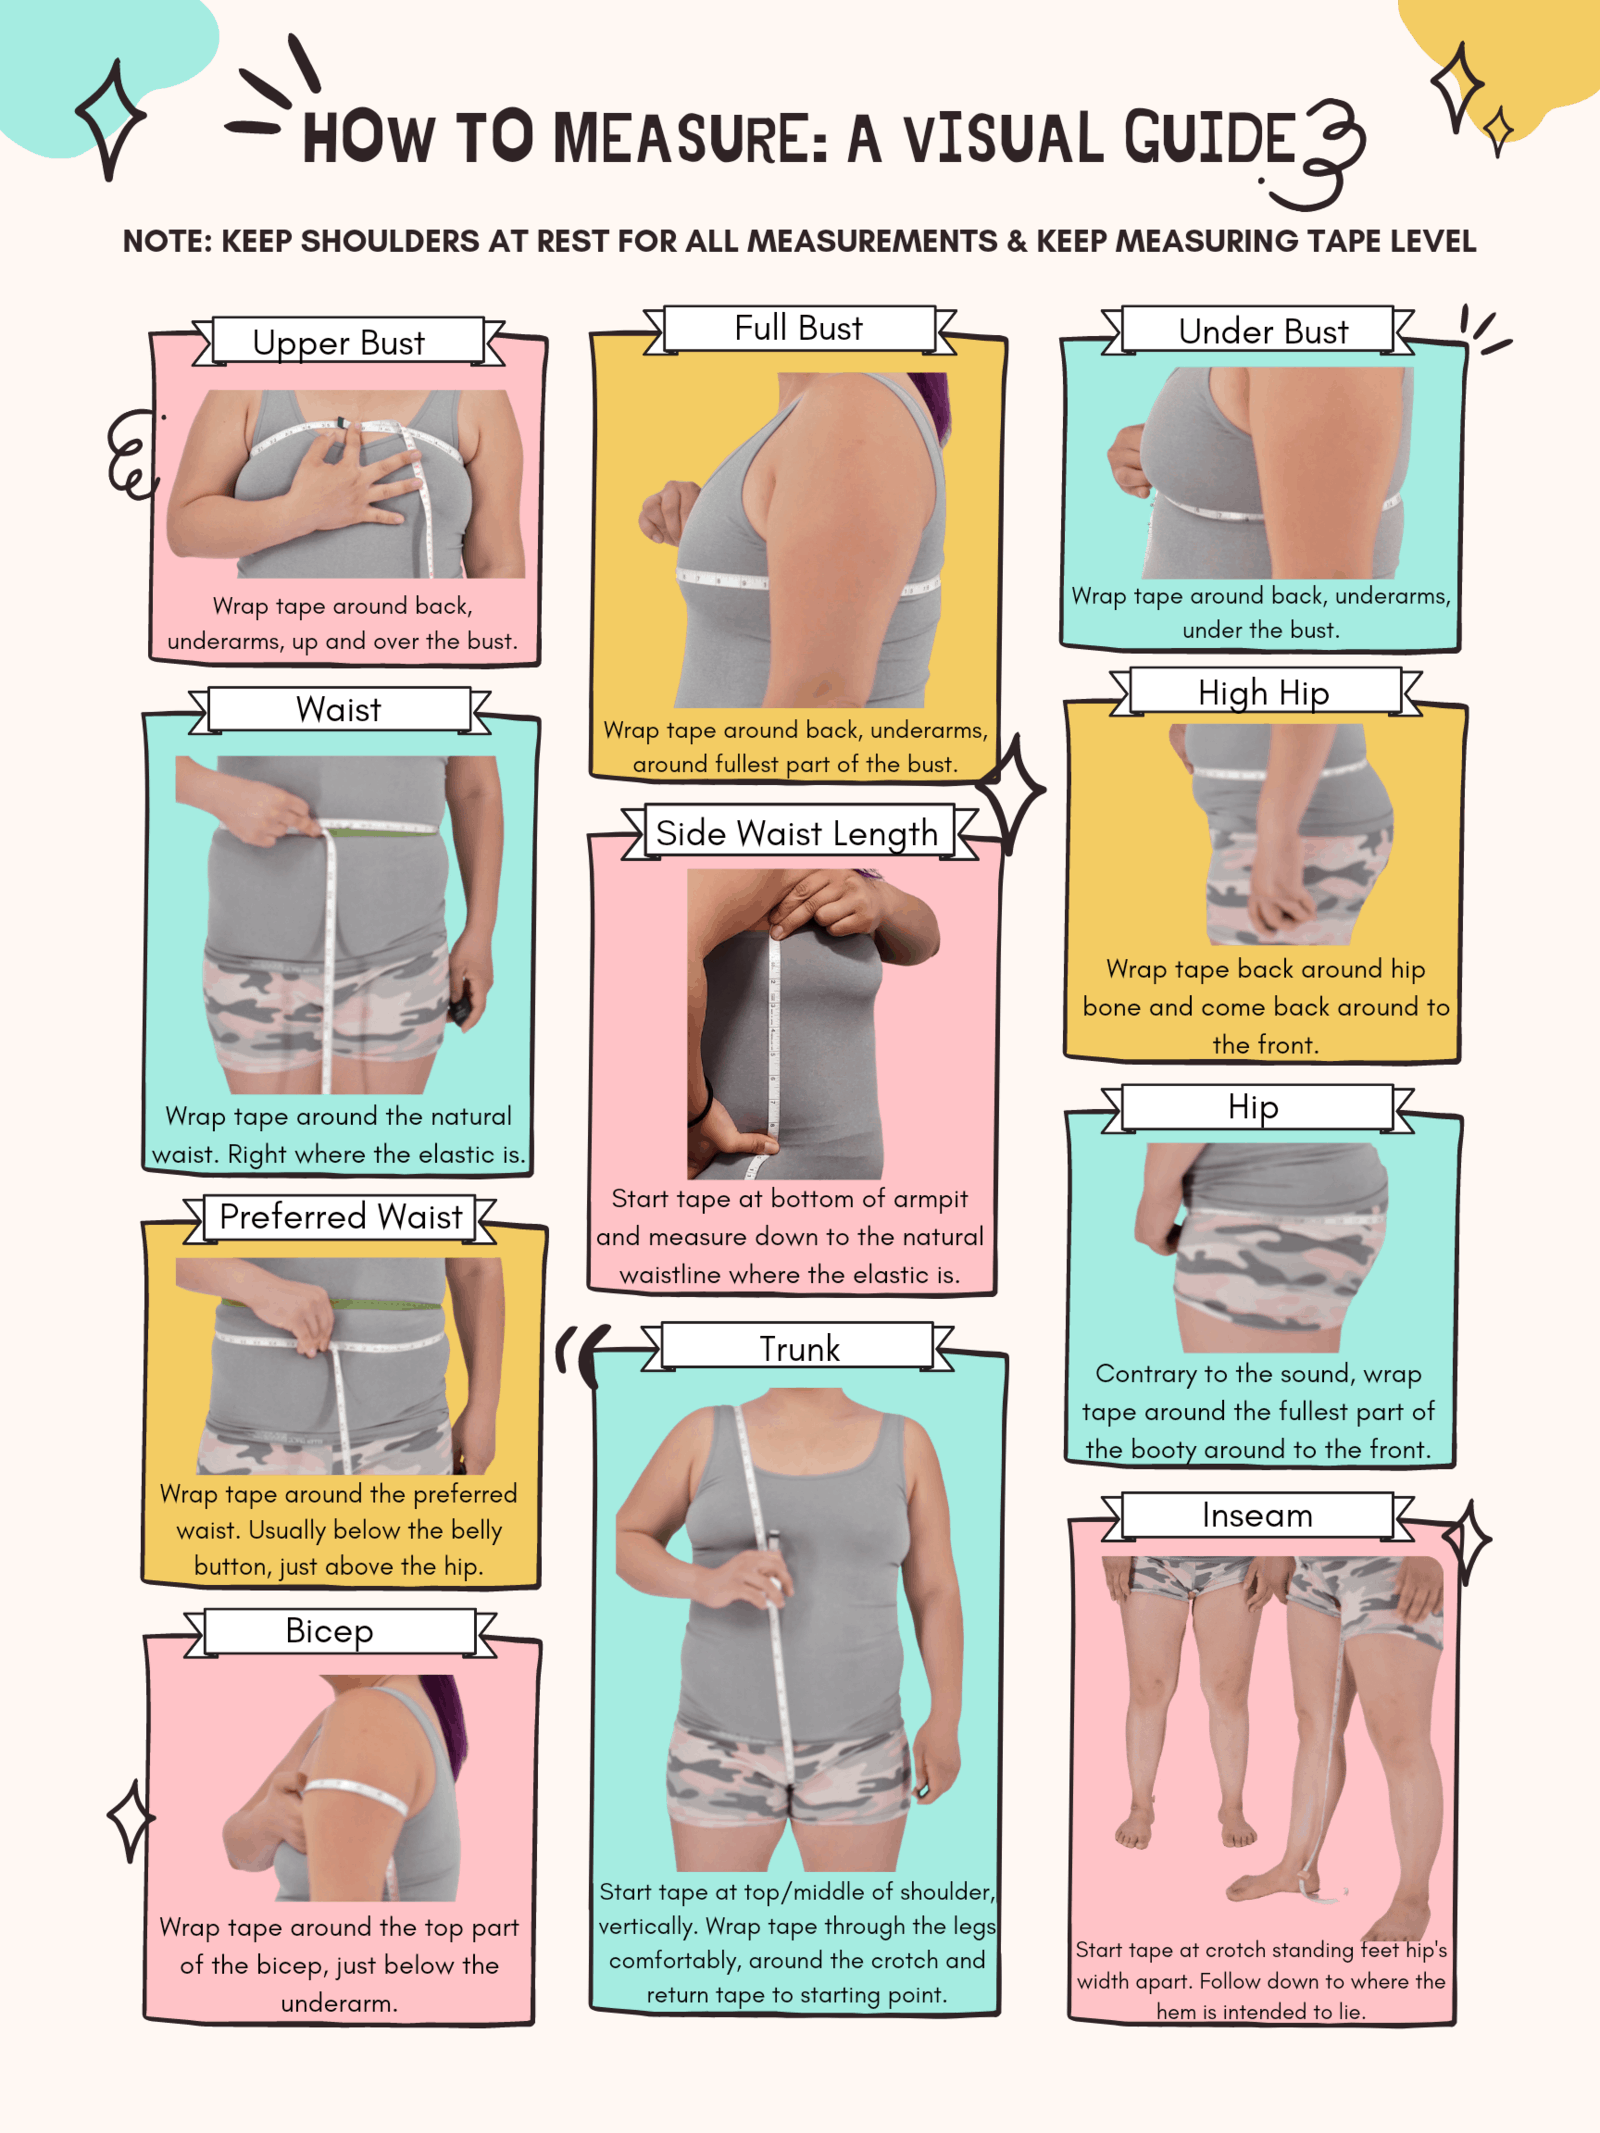 The Ultimate Guide How to Measure Your Waist in 5 Simple Steps